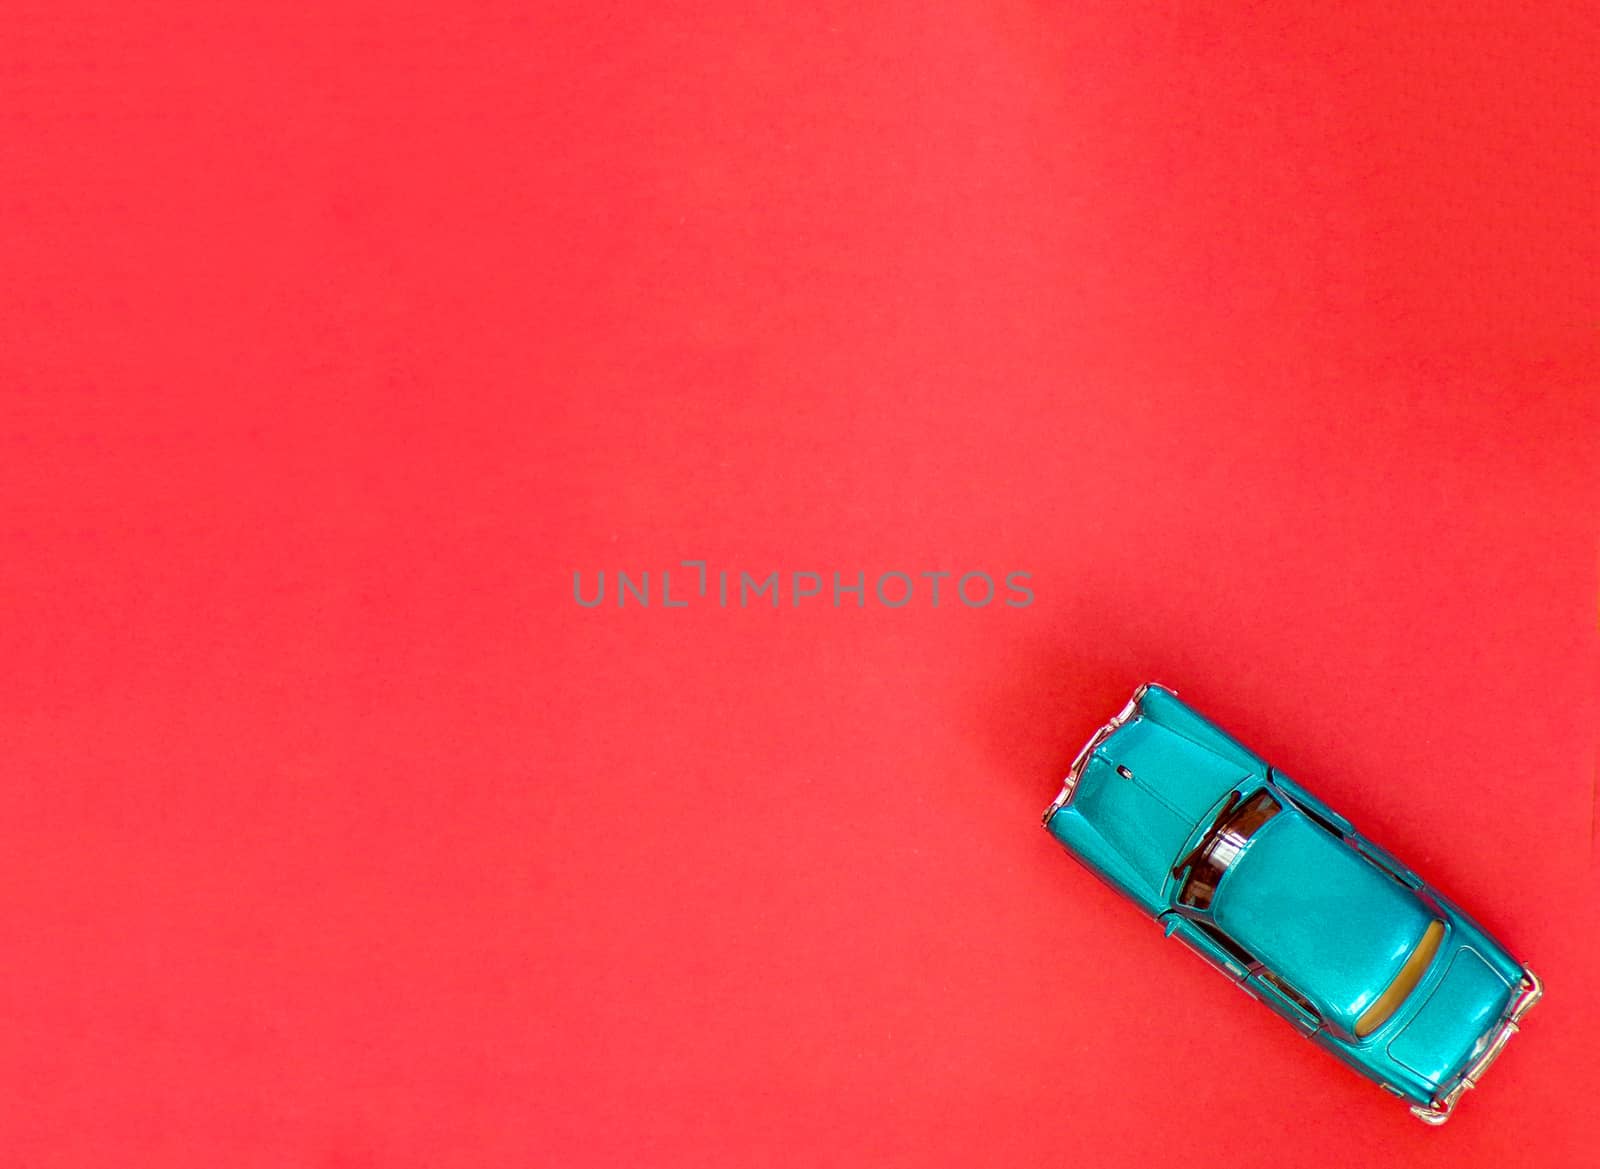 Toy car on a red background with copying space. The car model is made of blue metal.